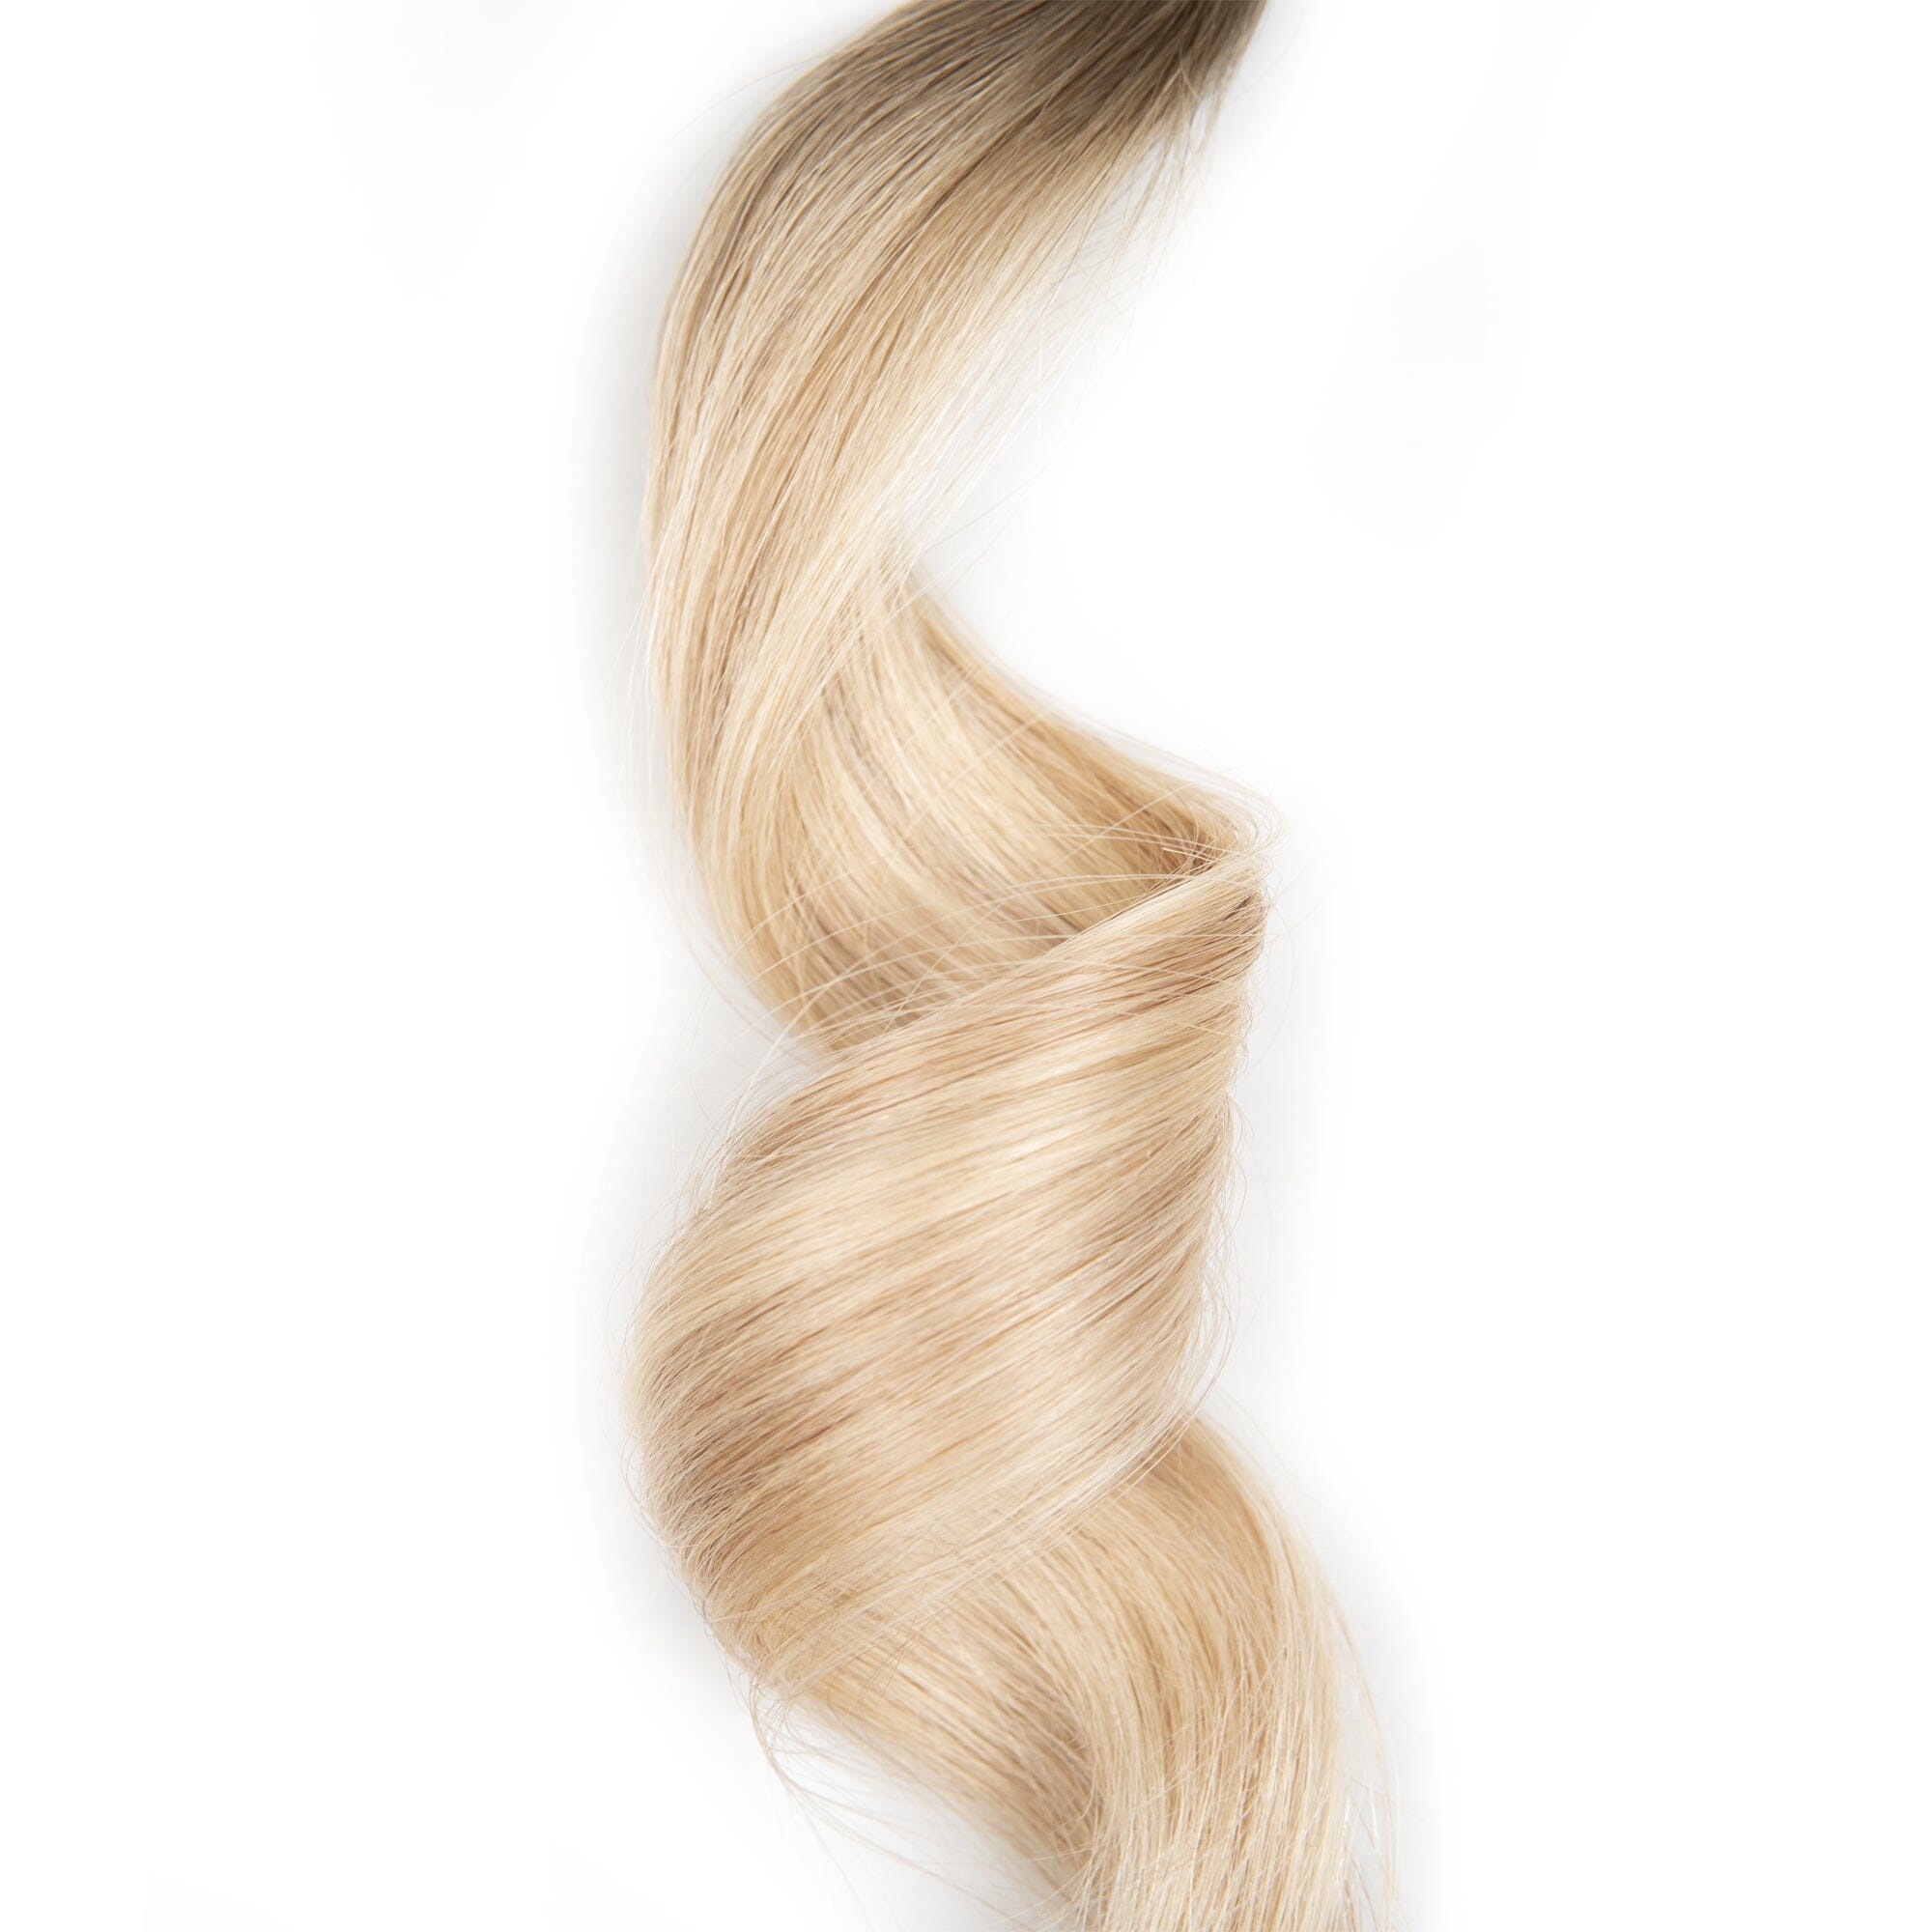 Easilocks Professional Tape Weft Extensions 16"- 18" Tape Weft Easilocks Stretched out Blonde 